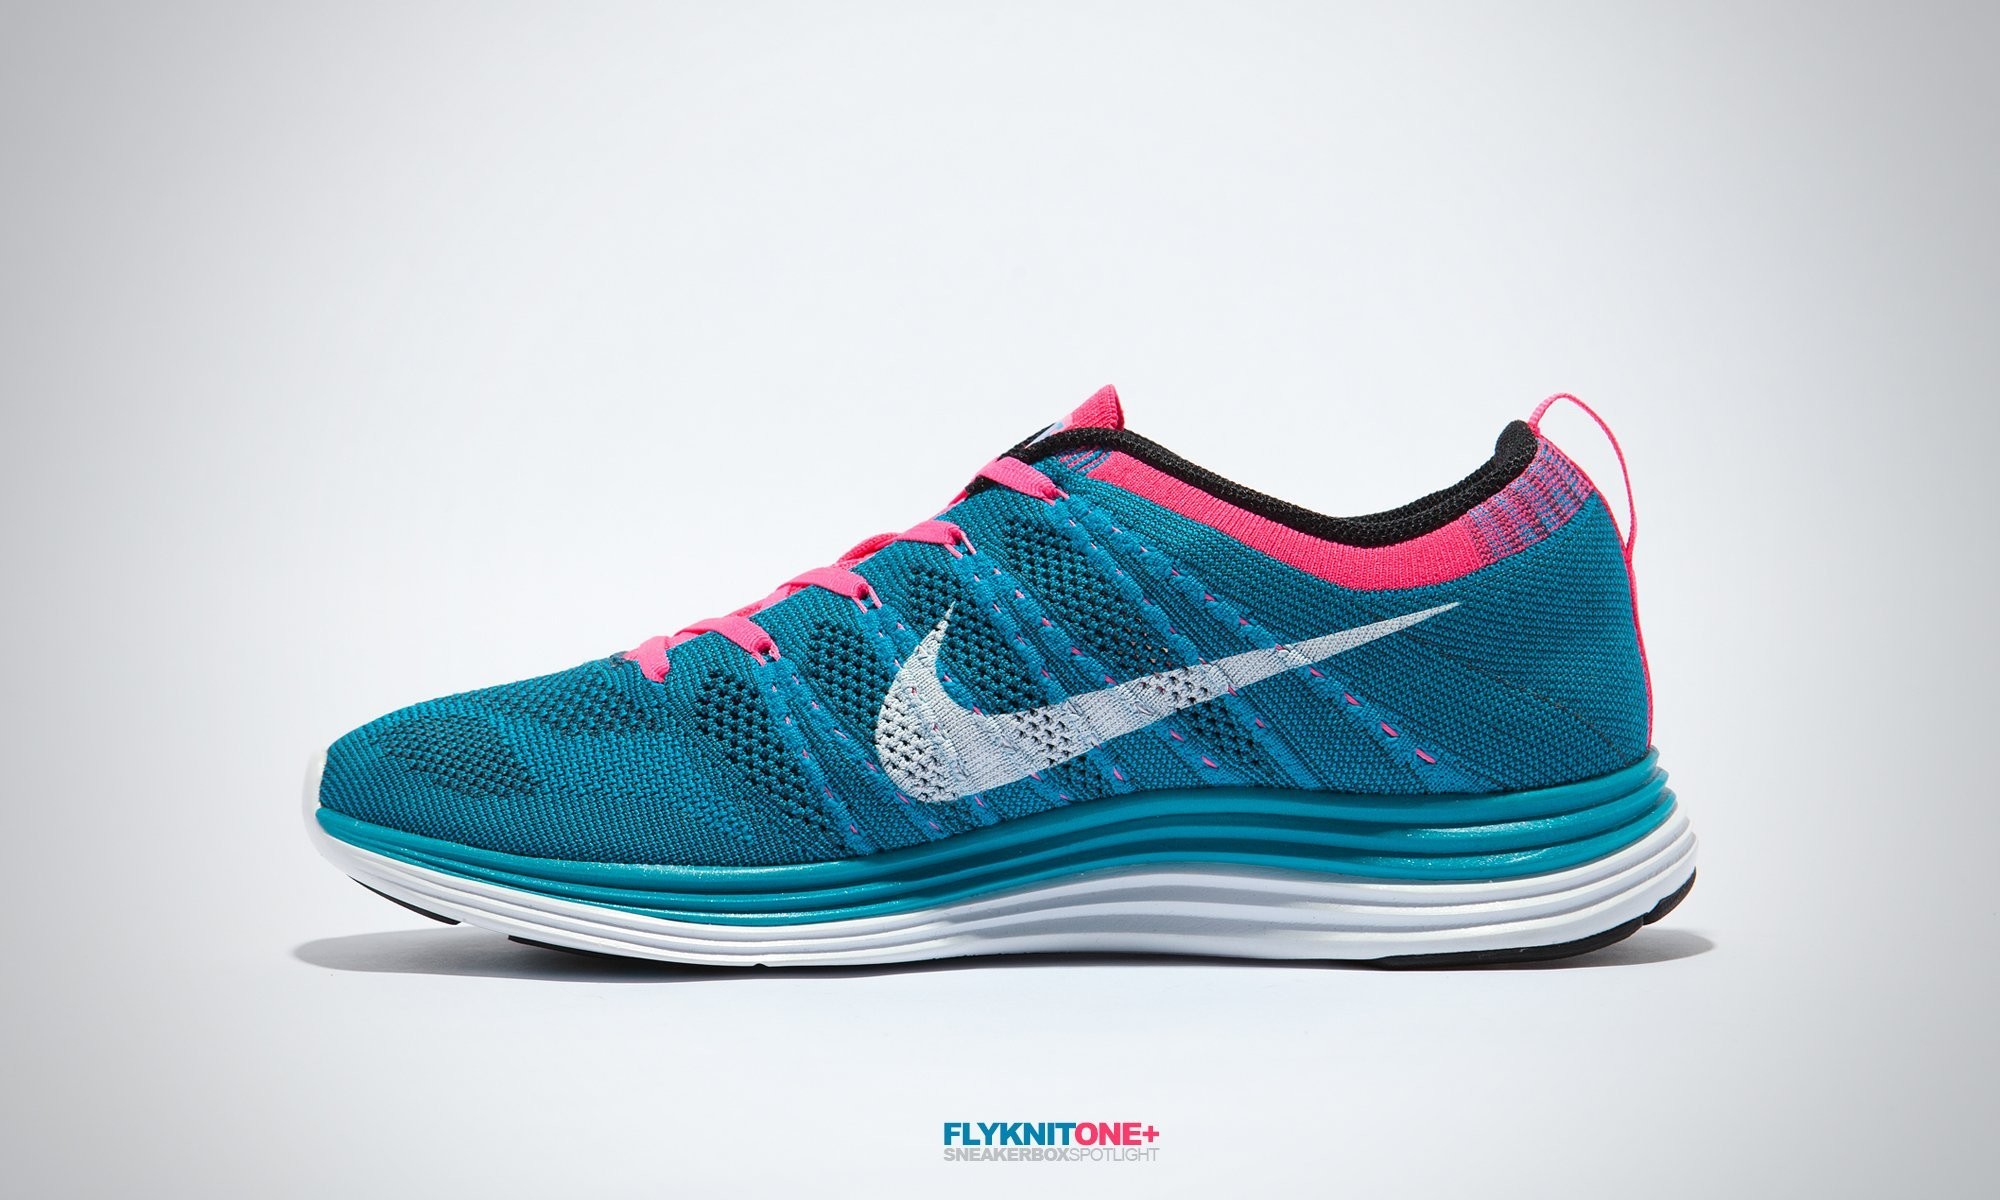 2000x1200 nike flyknit one+ lunar a side view nike shoes